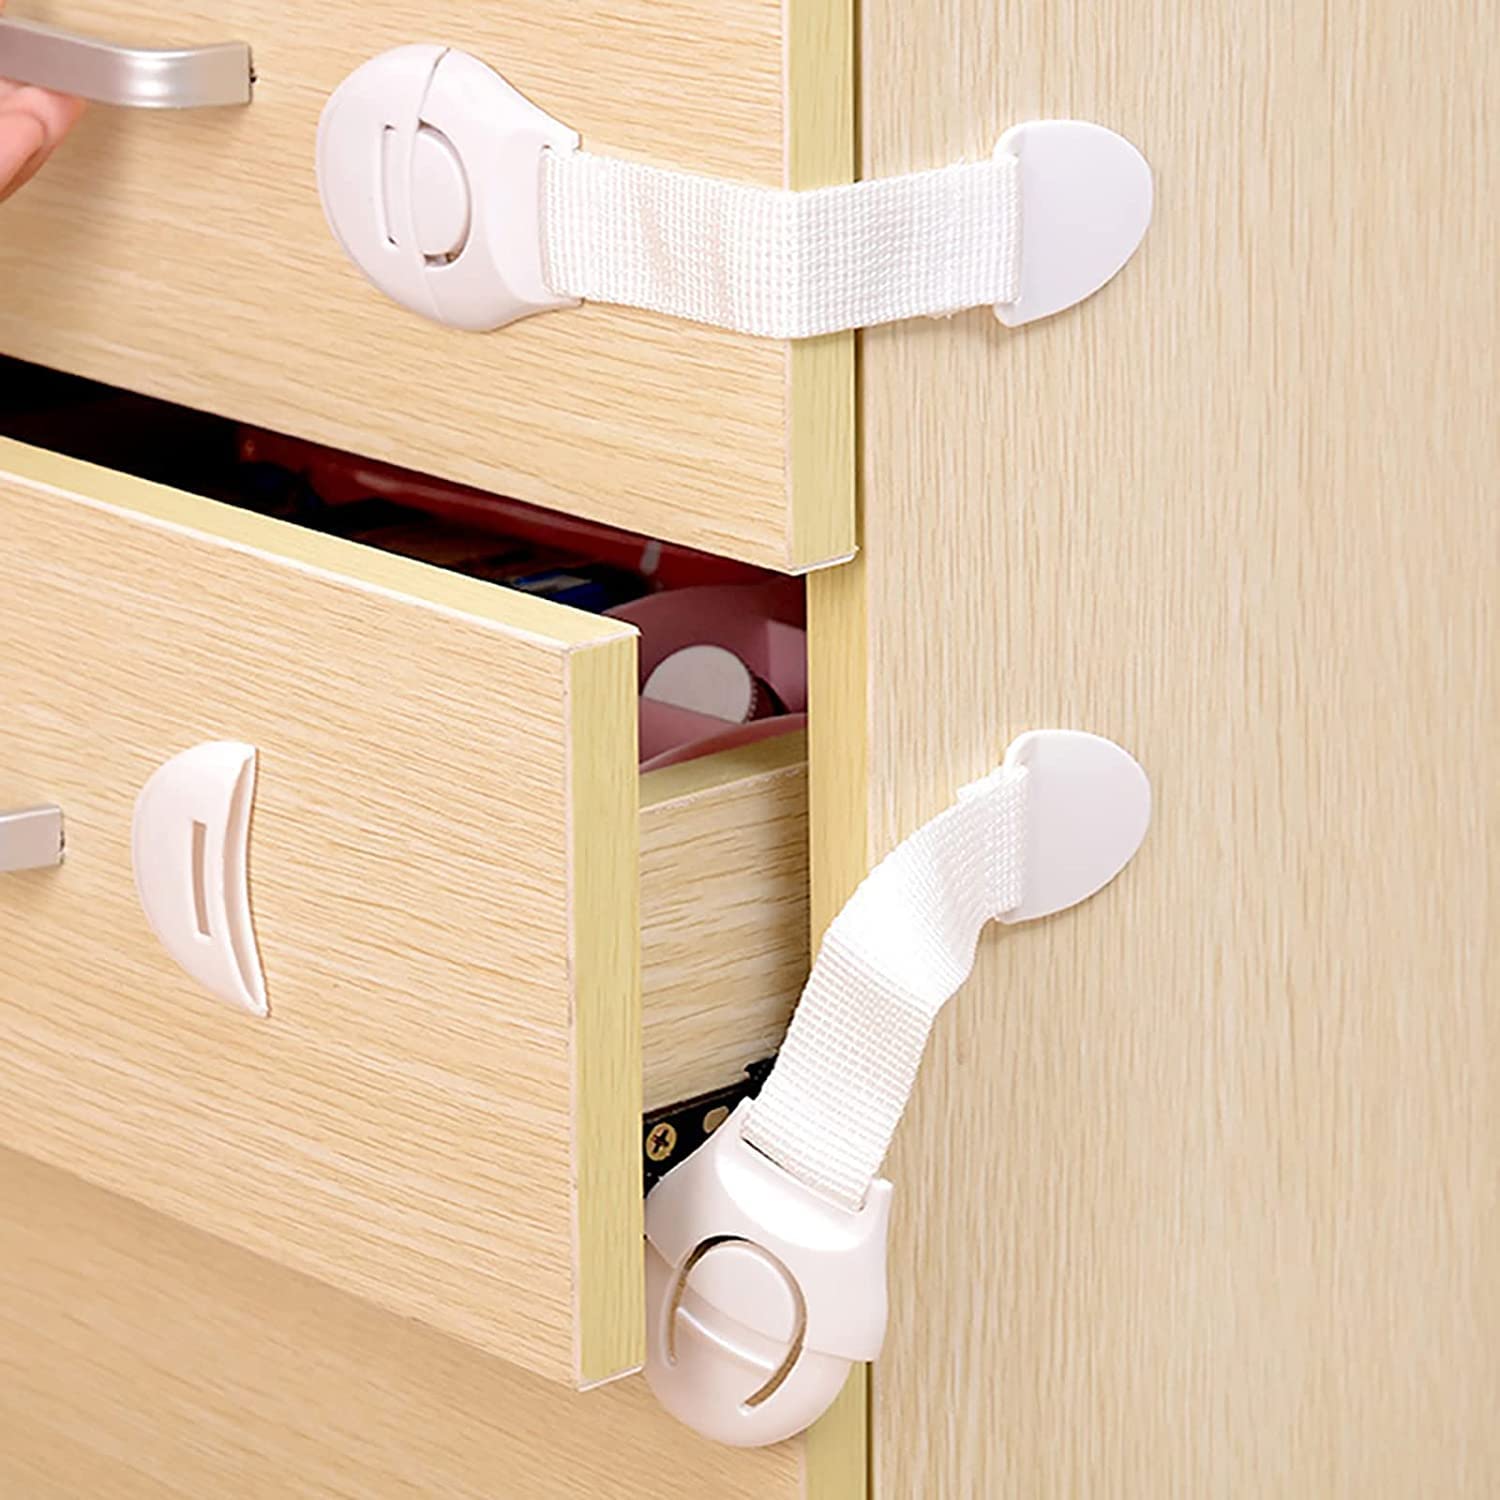 Child Safety Locks For Cabinets And Drawers (pack Of 10), Adhesive